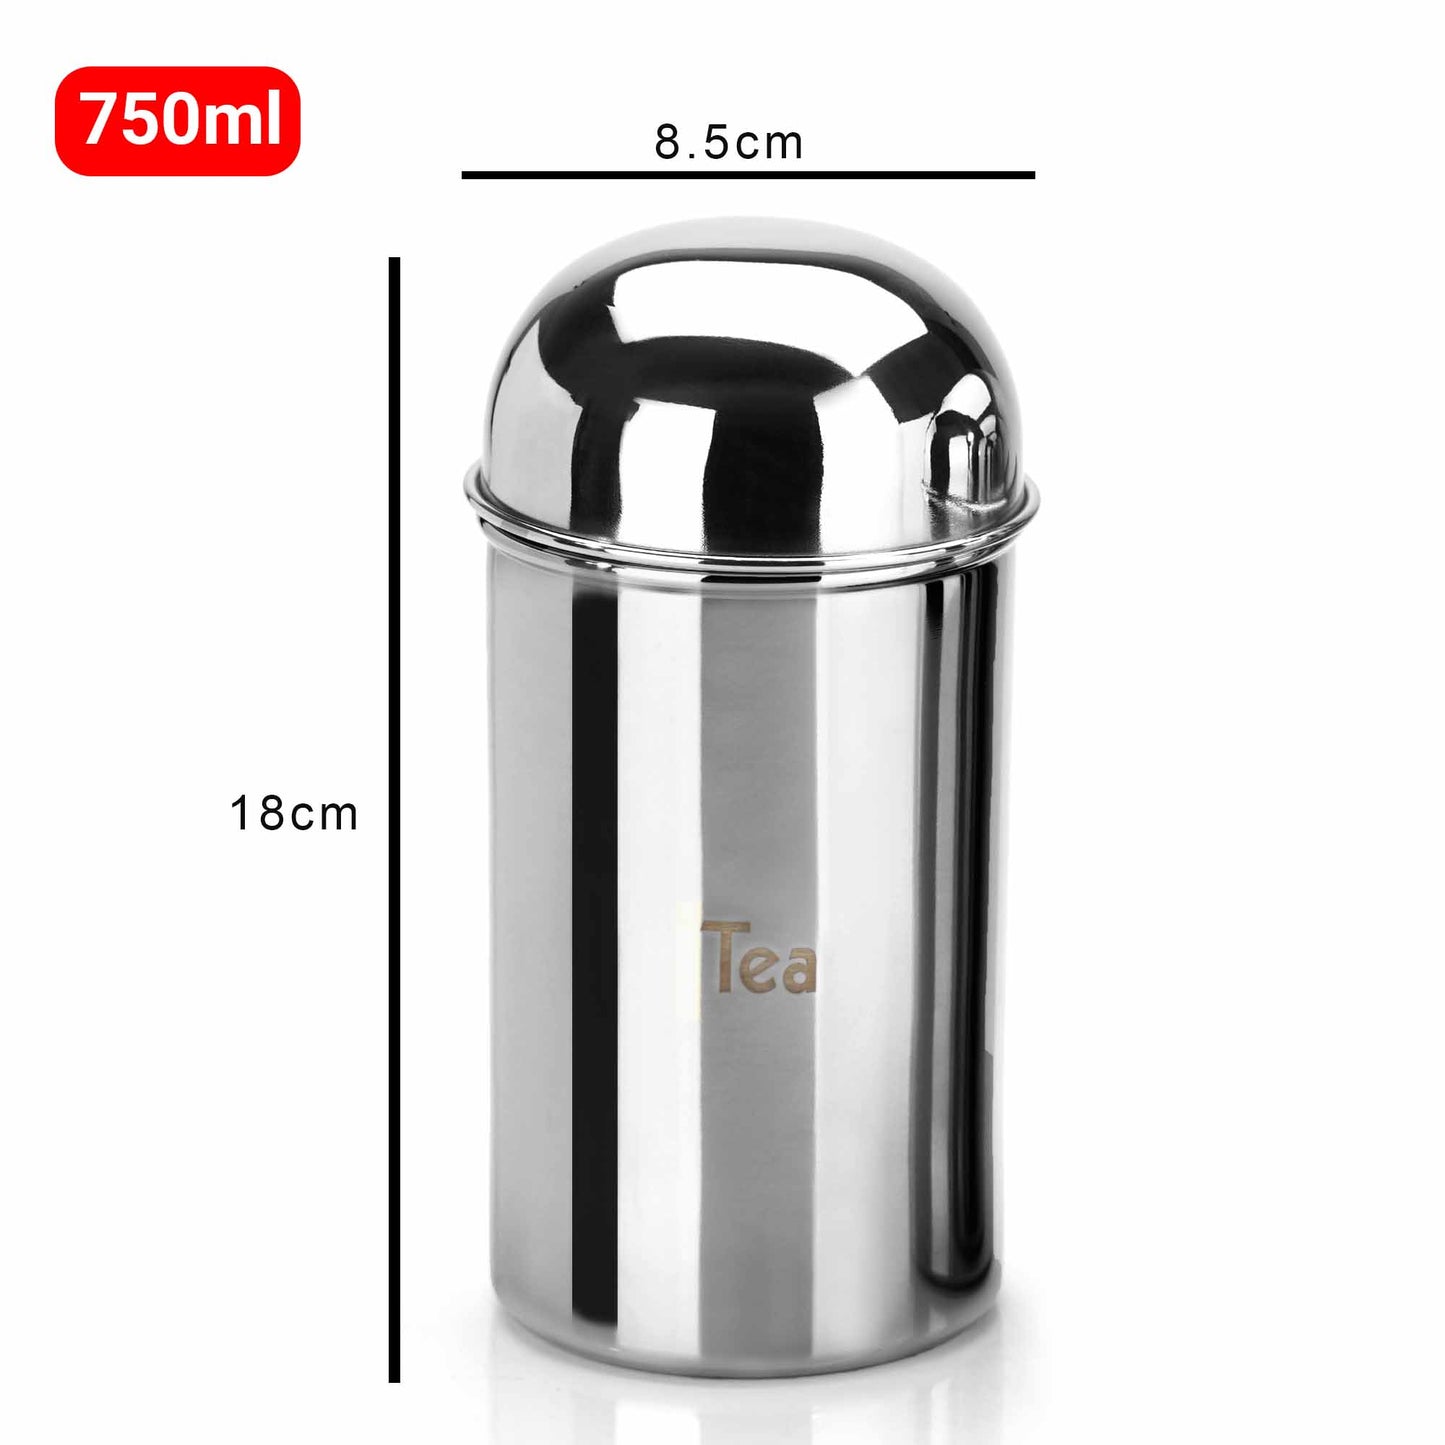 PddFalcon Stainless Steel Kitchen Storage Dome Canister Tea 750ml